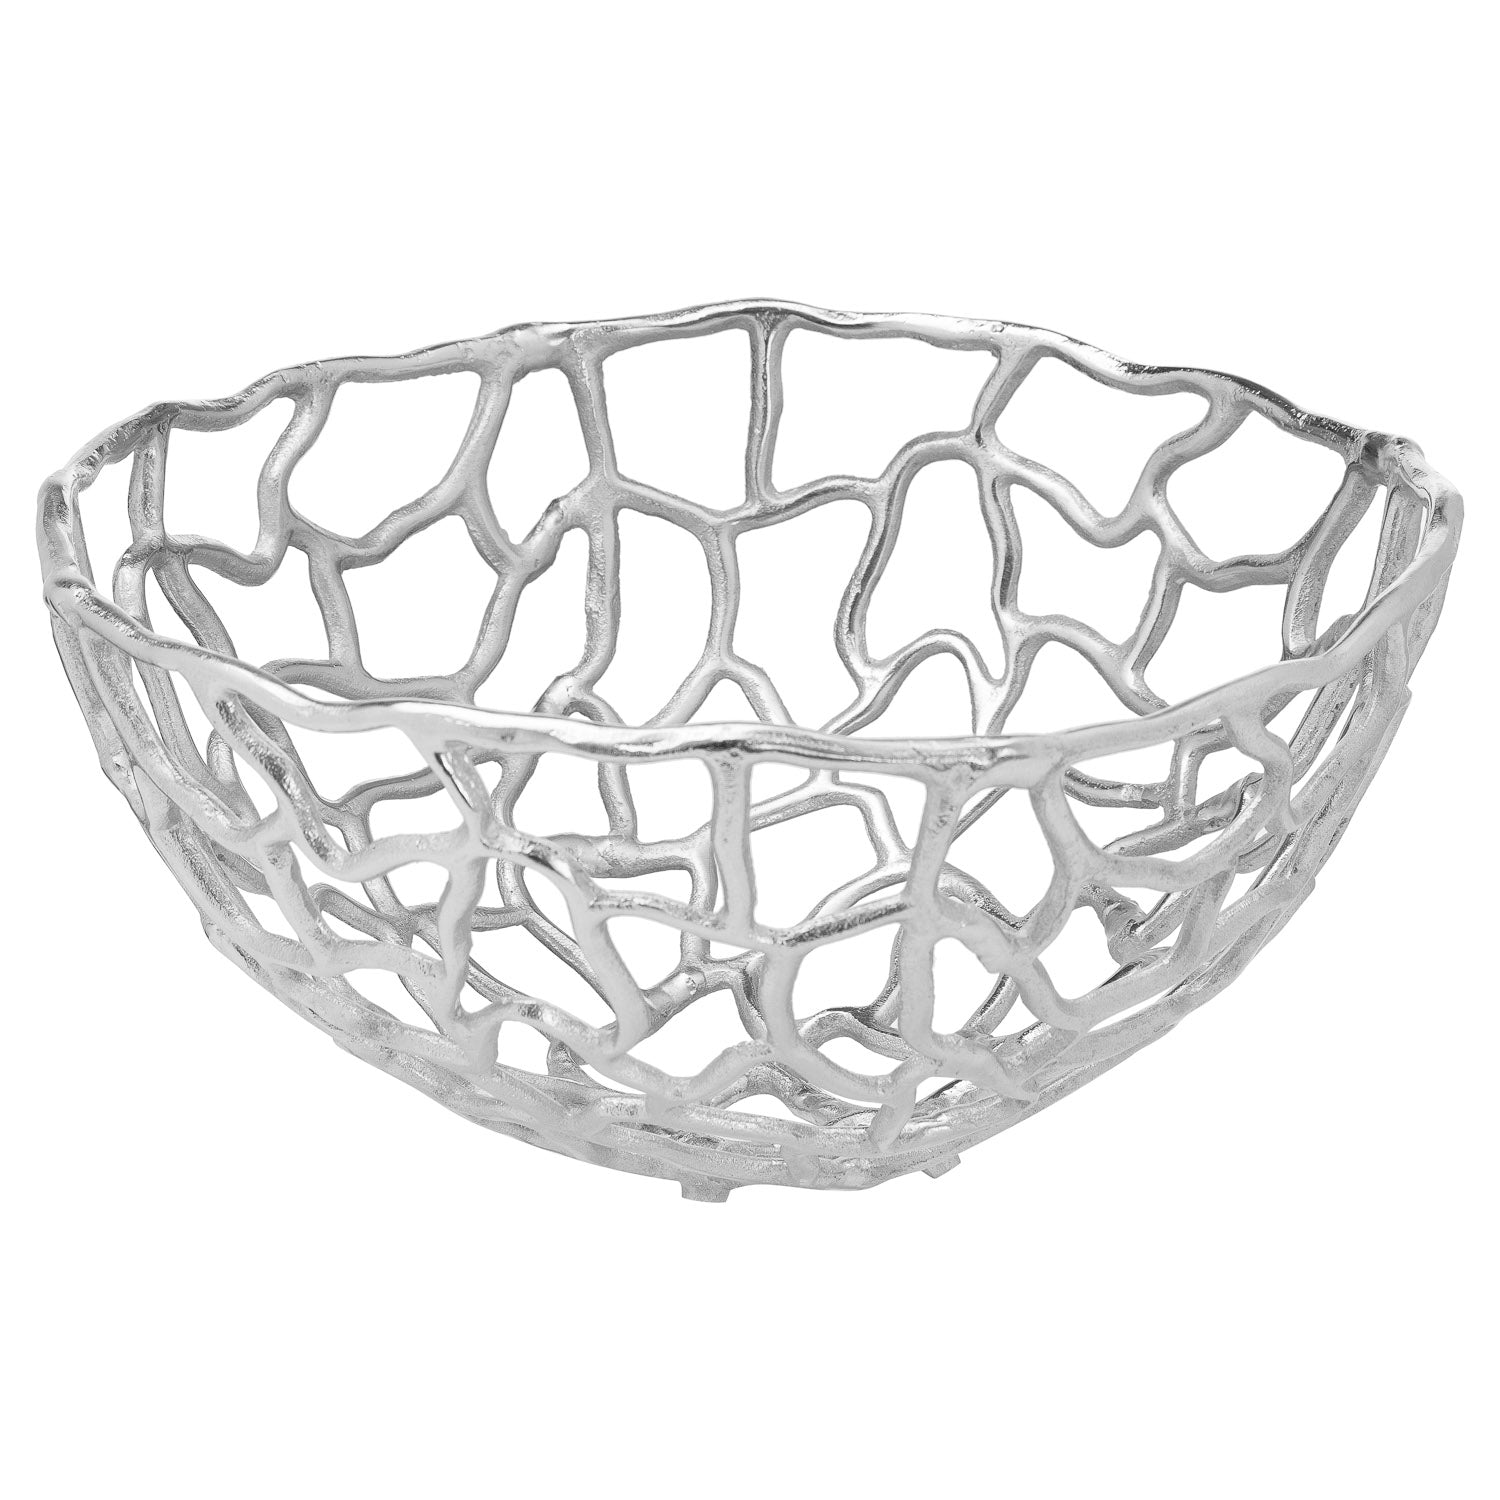 Ohlson Silver Perforated Coral inspired Bowl Large